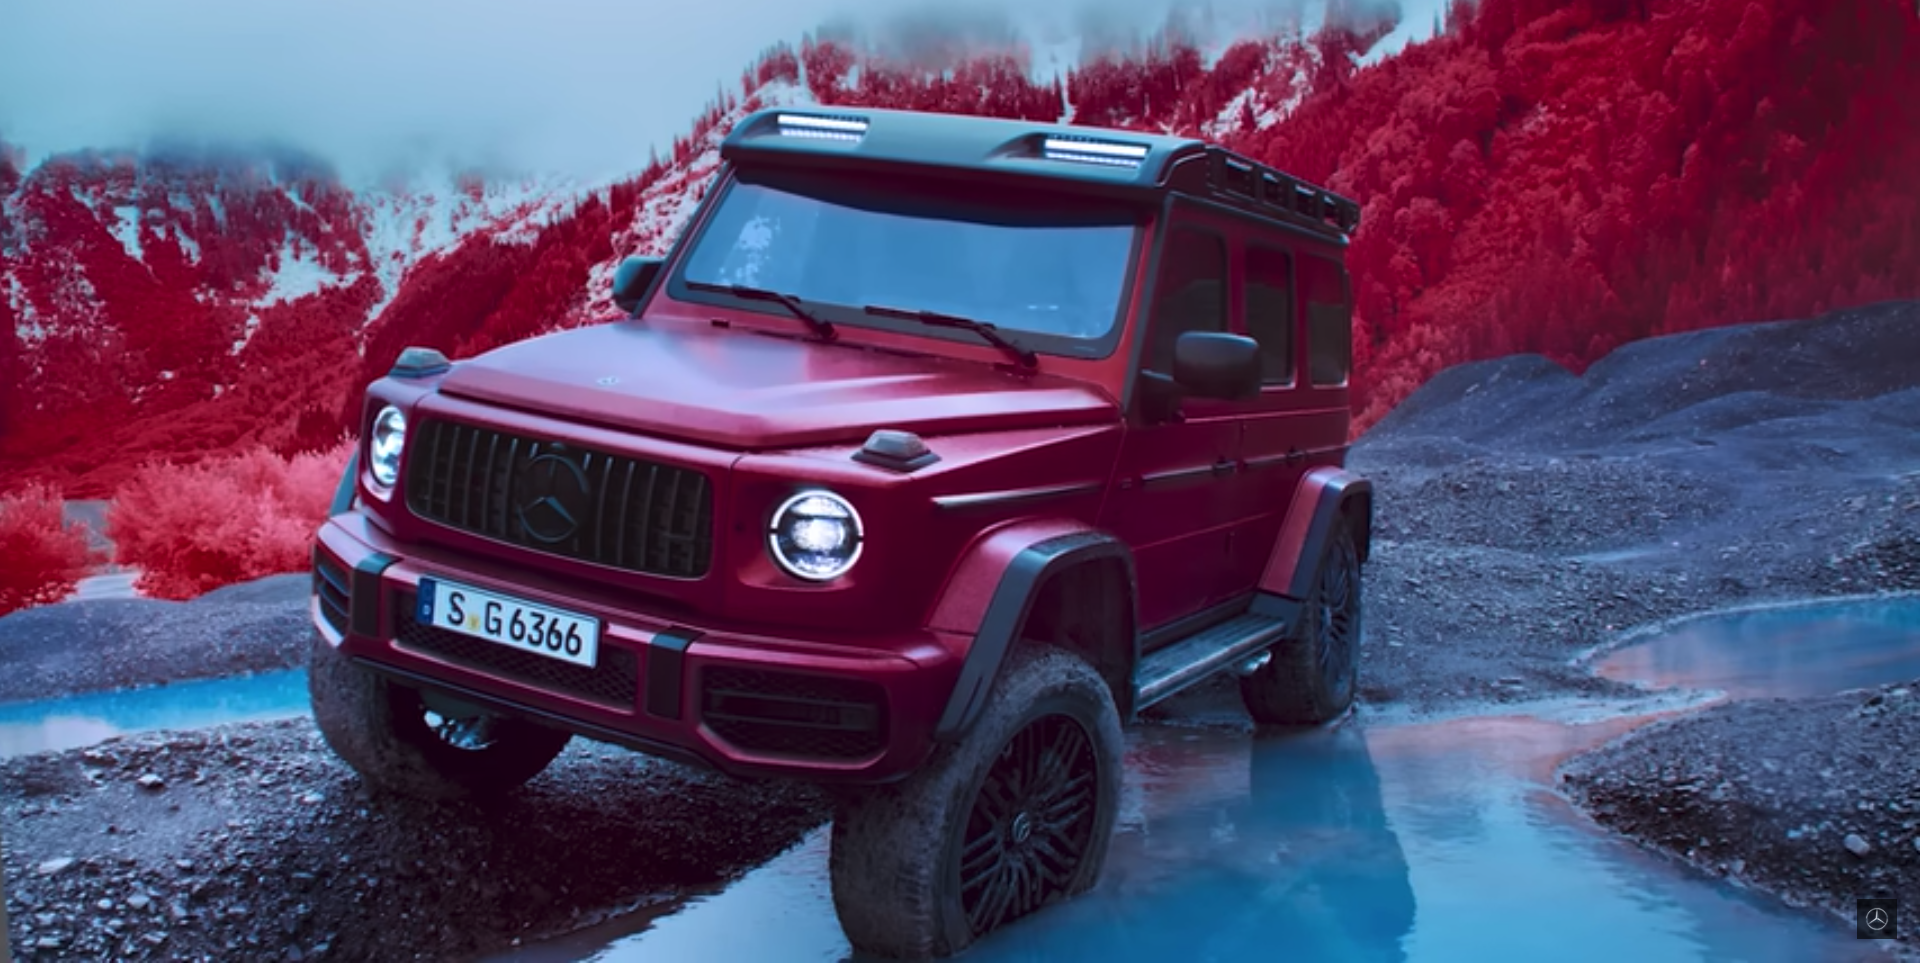 The 2023 Mercedes-AMG G63 4x4 Squared is a 585-HP Factory Monster Truck